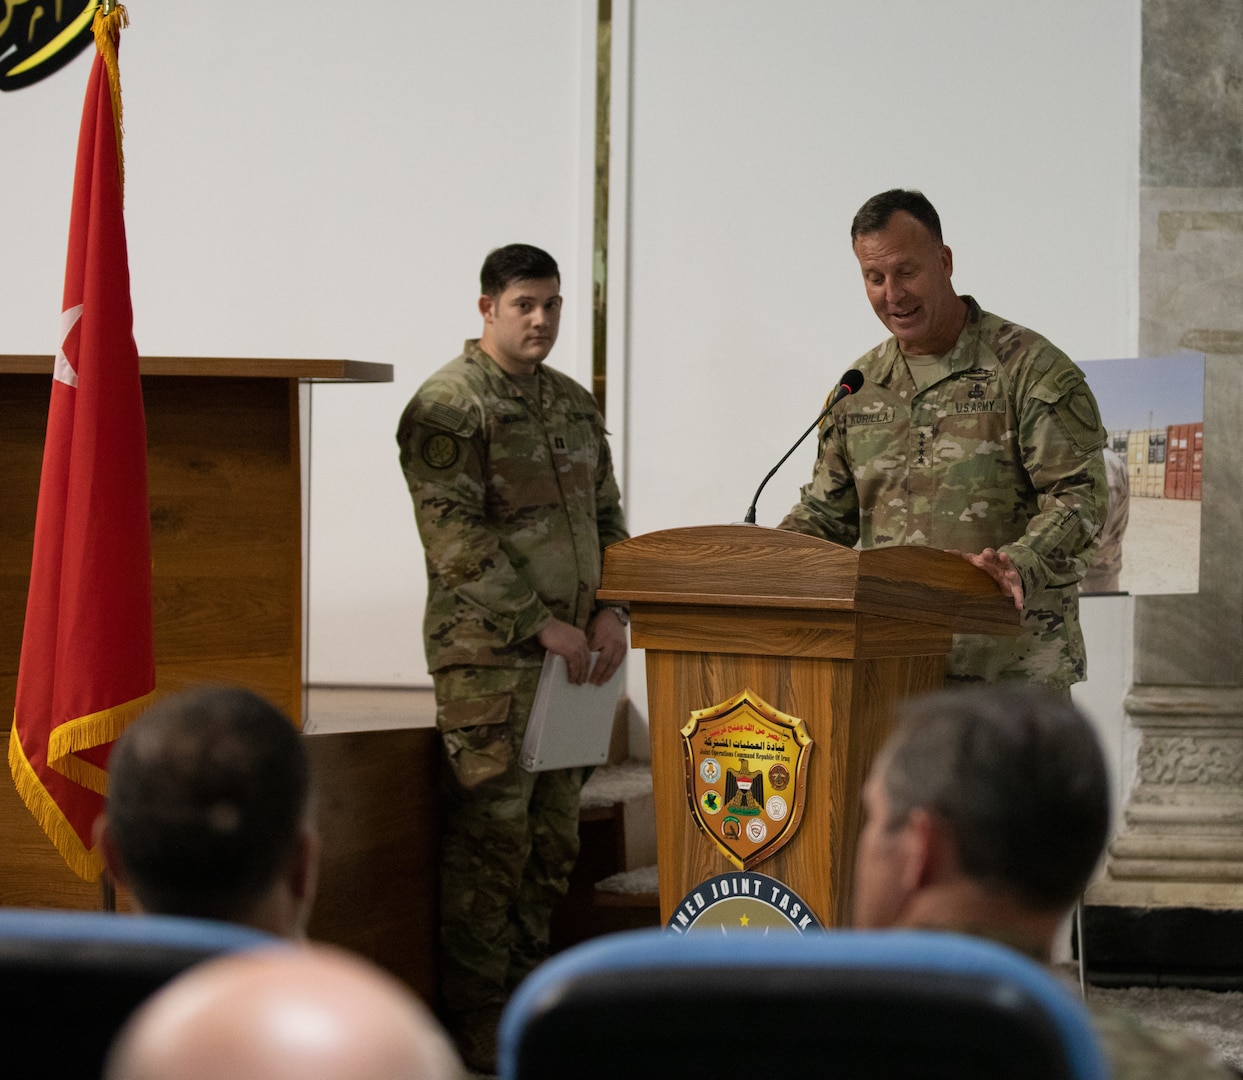 U.S. Army Gen. Michael E. Kurilla, commander of the U.S. Central Command, speaks to attendees during a Combined Joint Task Force - Operation Inherent Resolve transfer of authority ceremony in Baghdad, Iraq, Sept. 8, 2022. Kurilla presided over the transfer of authority for CJTF-OIR from U.S. Army Maj. Gen. John Brennan to U.S. Army Maj. Gen. Matthew McFarlane. (U.S Army photo by Sgt. Julio Hernandez) (This photo has been cropped to emphasize the subject)